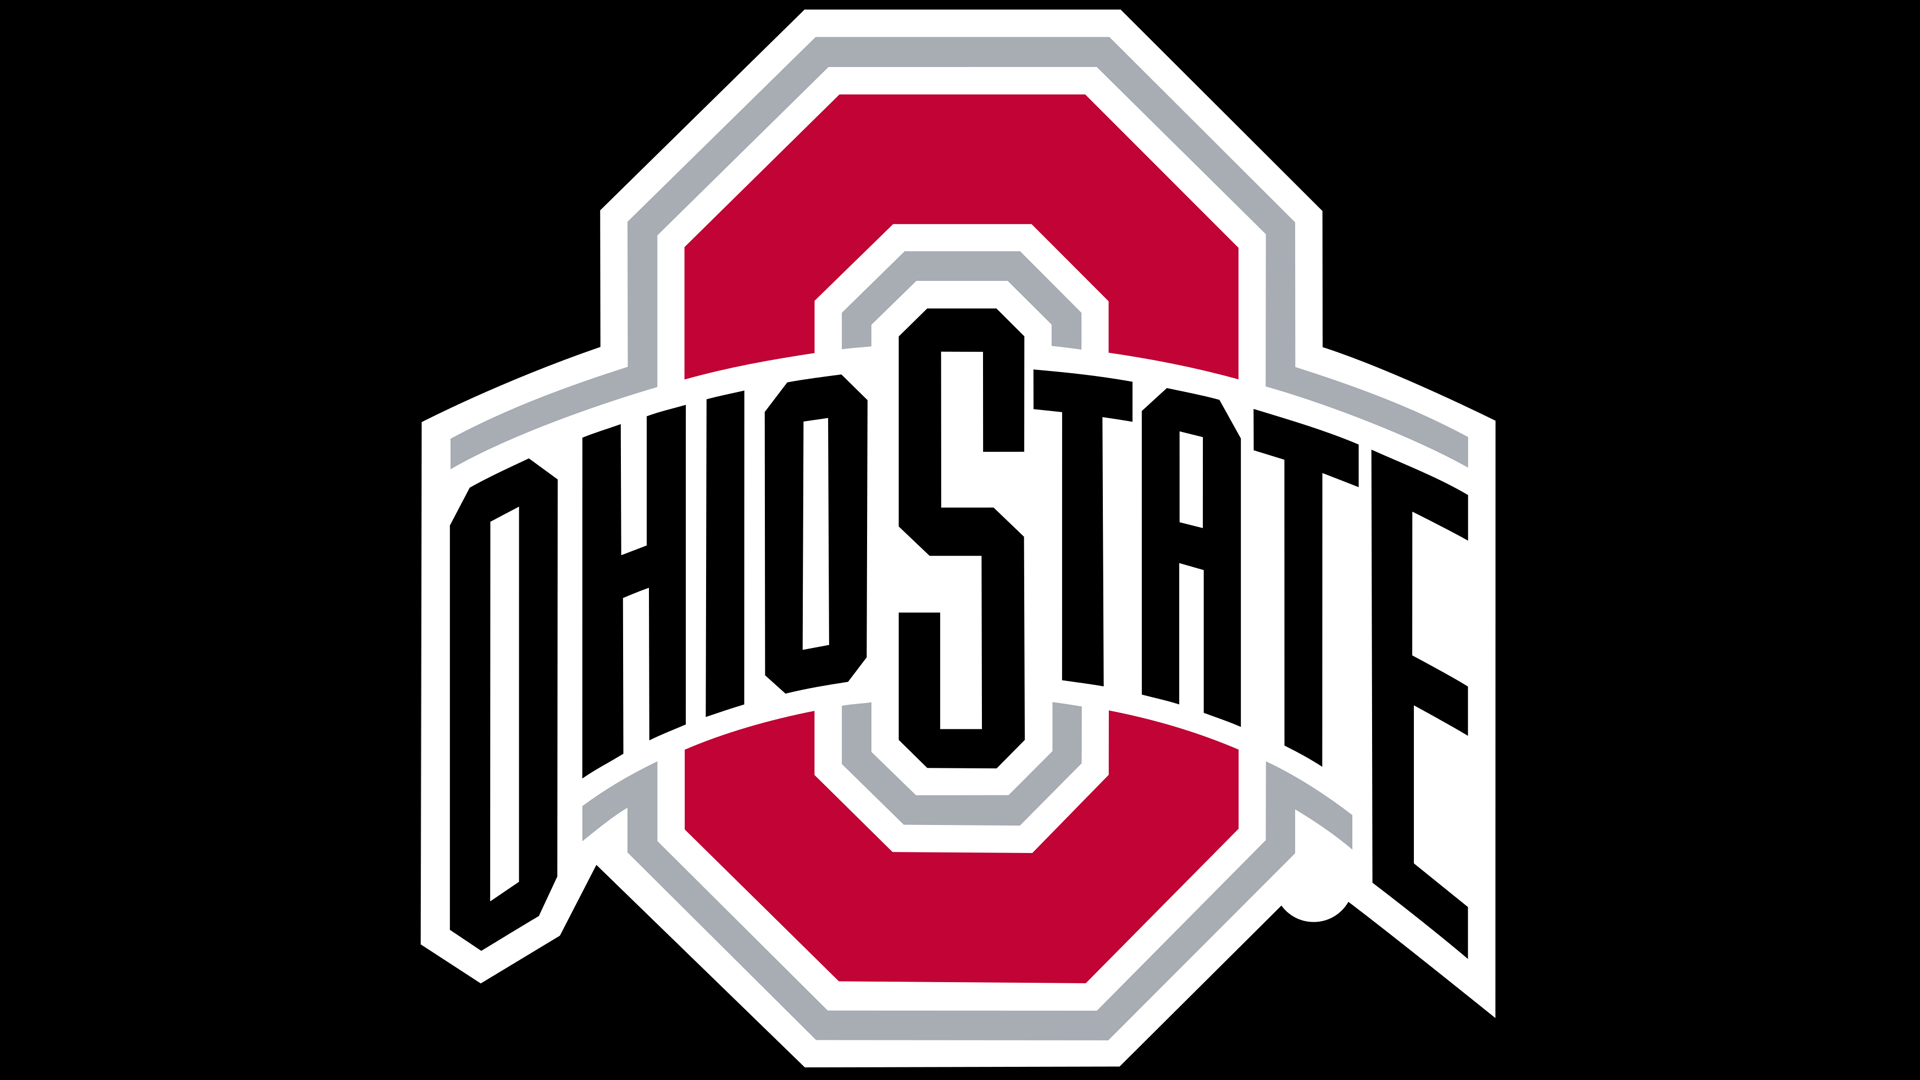 Meaning Ohio State logo and symbol.